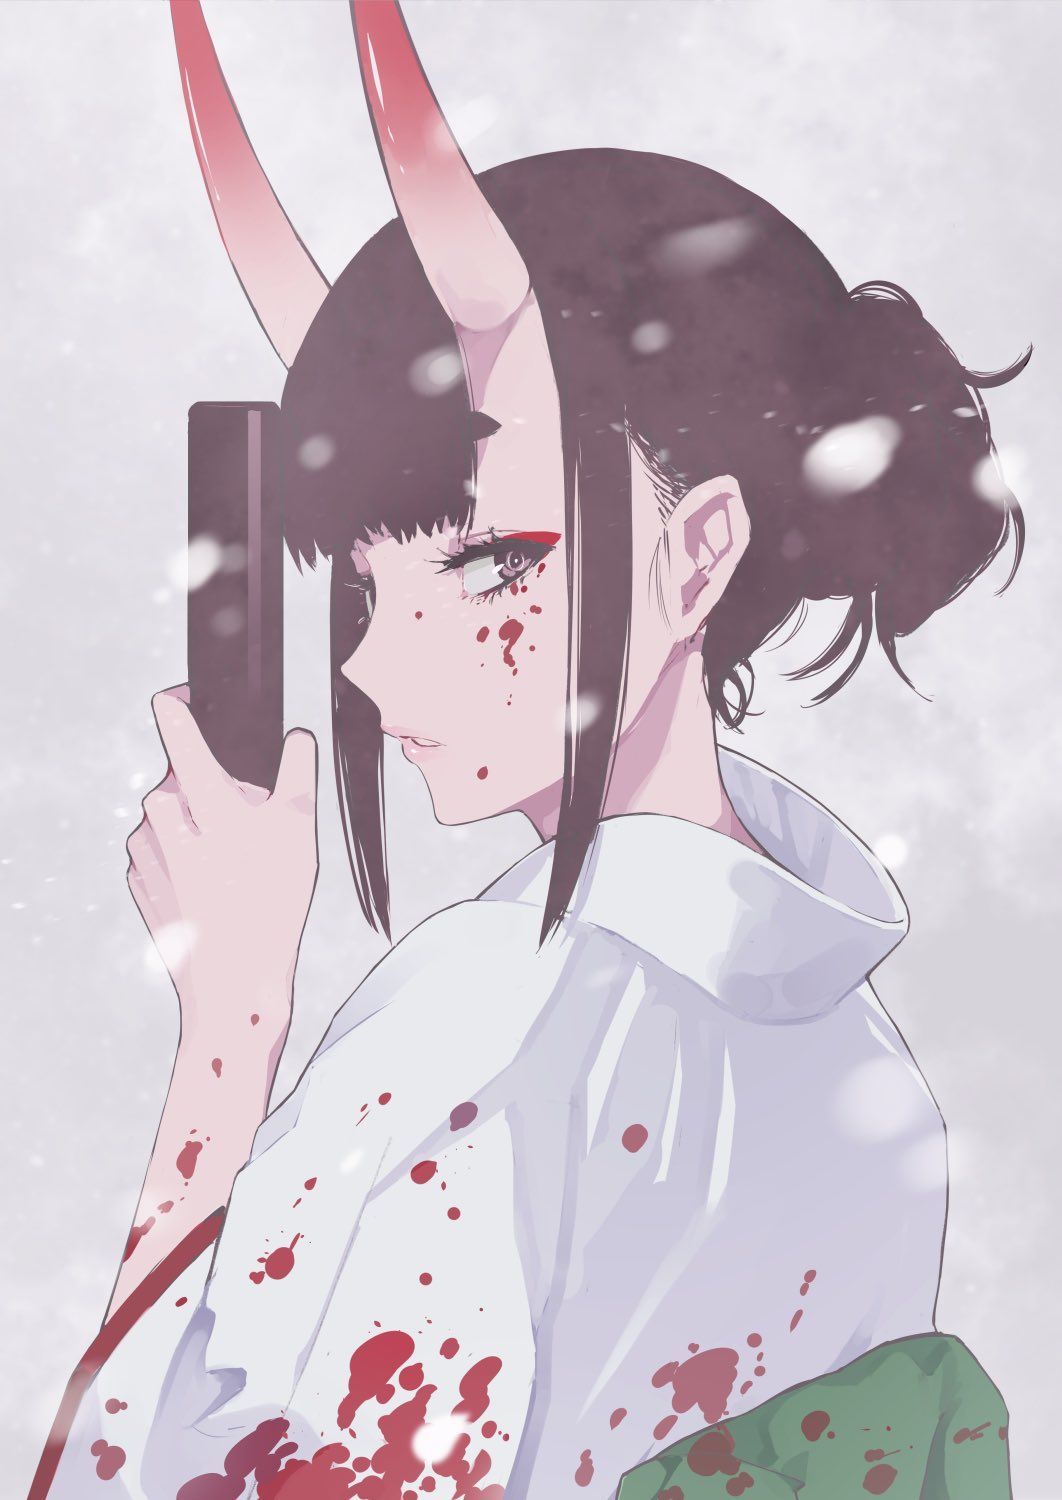 100+] Anime Pfp Aesthetic Wallpapers | Wallpapers.com